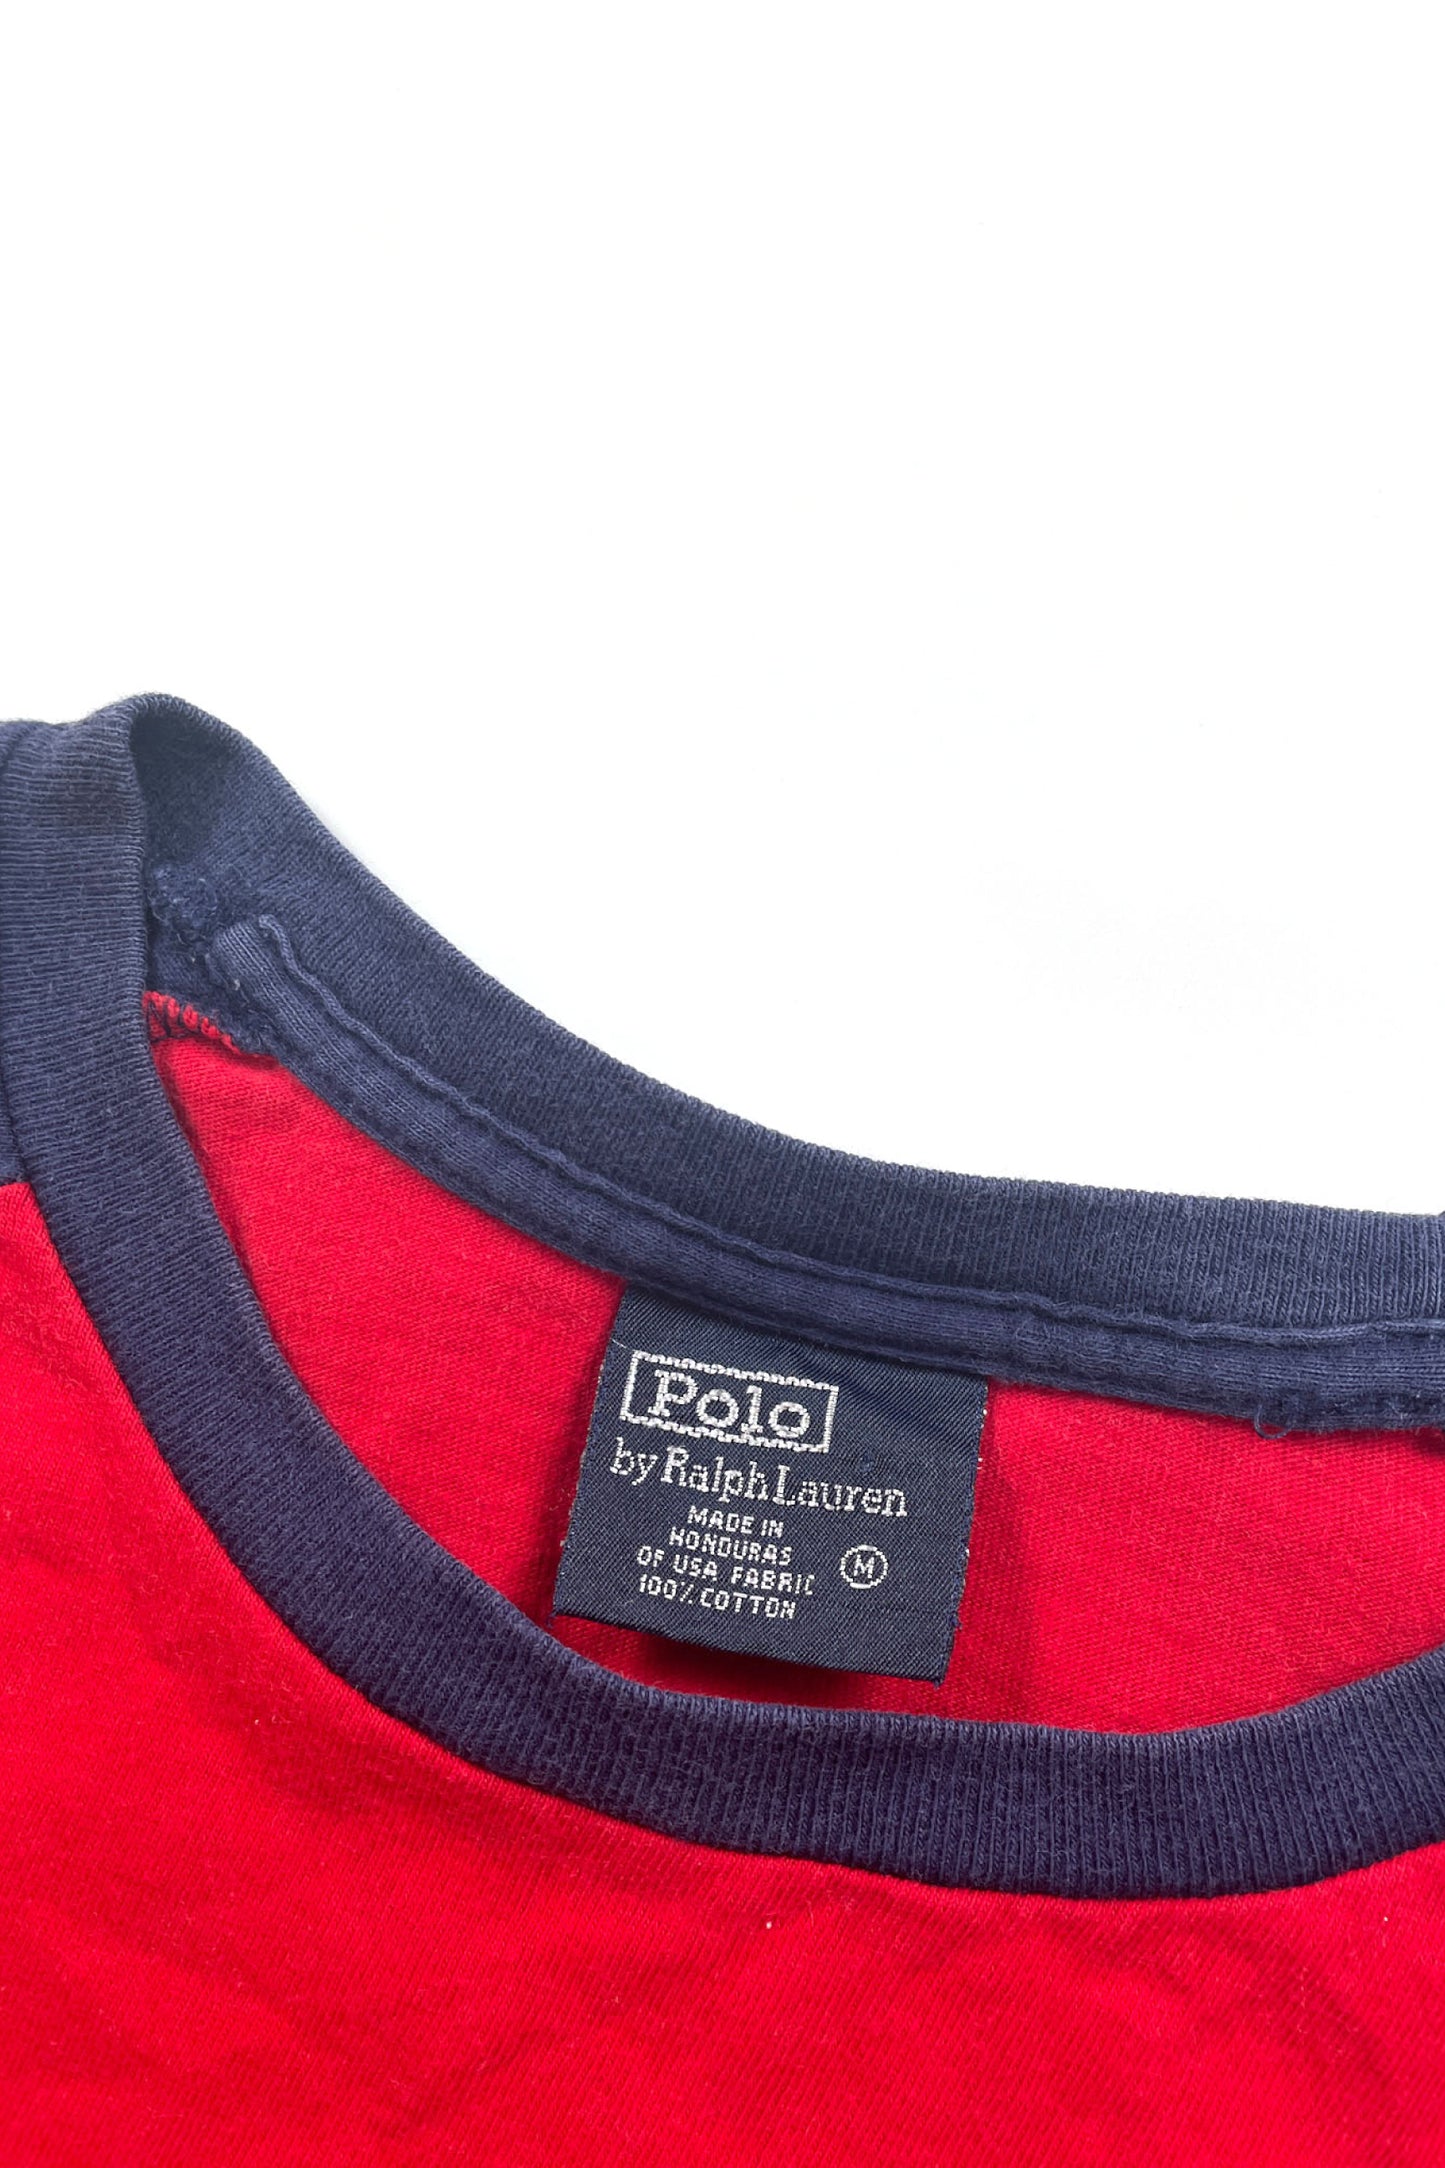 90's Polo by Ralph Lauren T-shirt red/navy